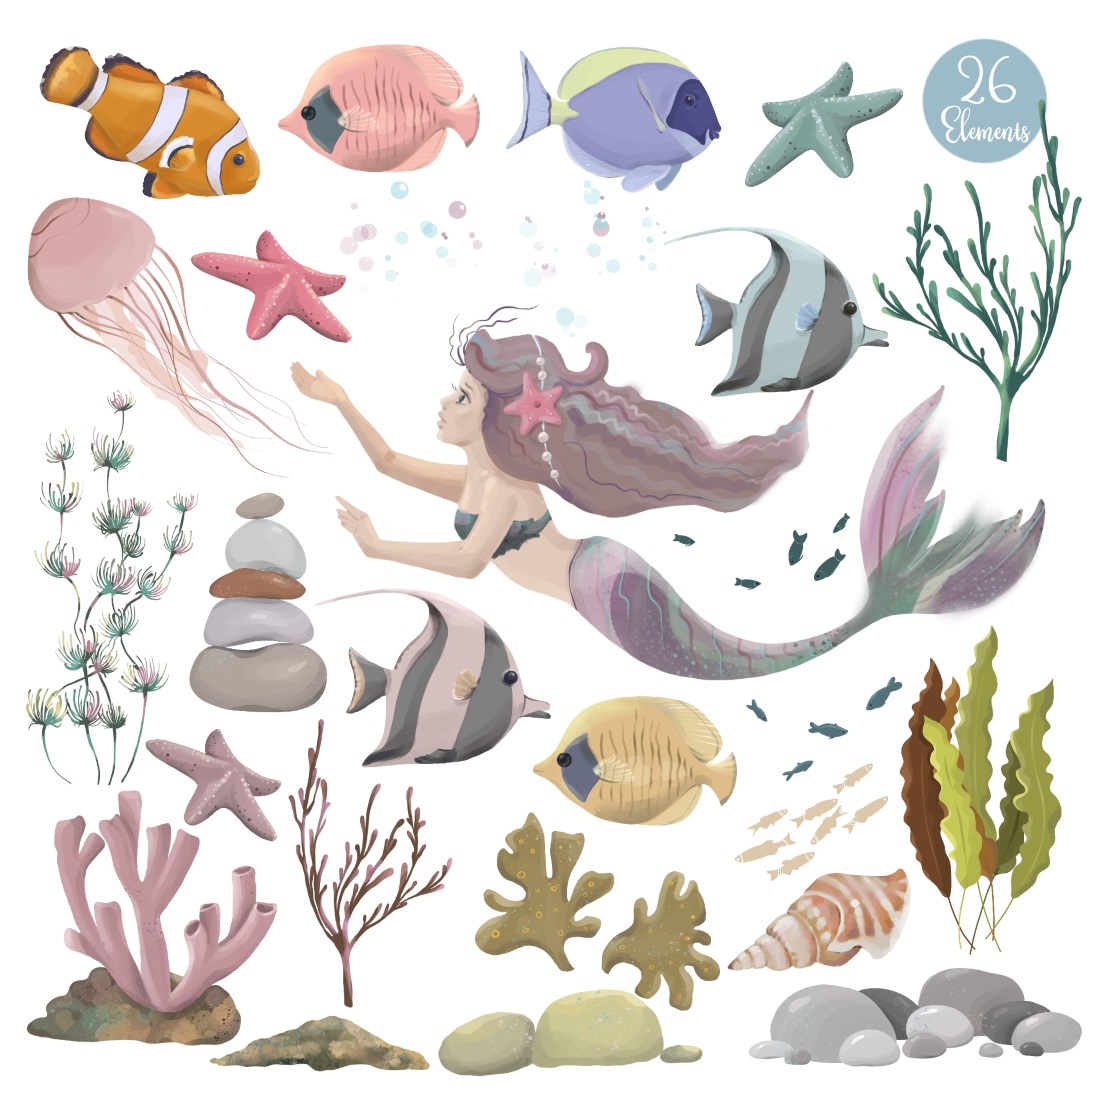 Under The Sea Illustration cover